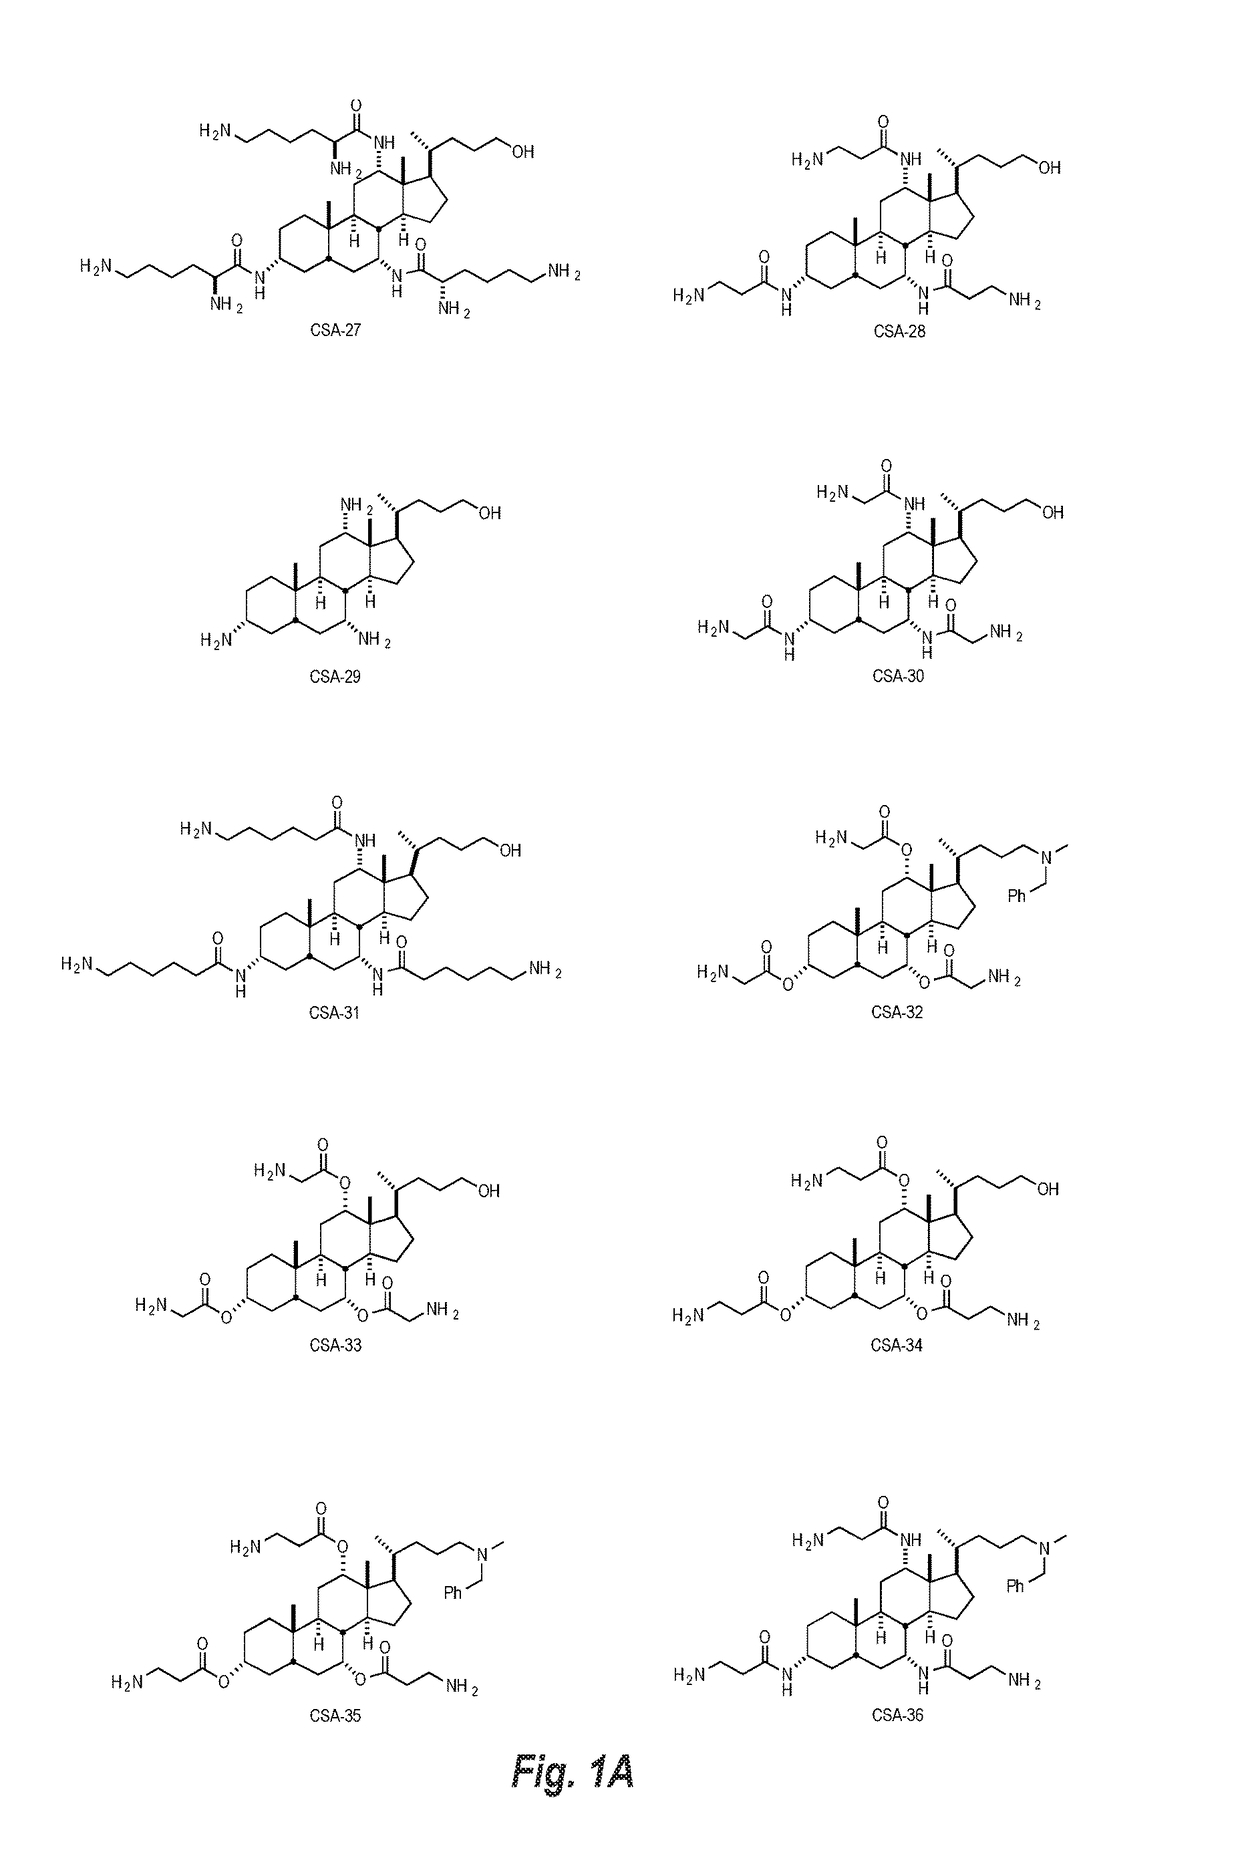 Cationic steroidal antimicrobial compositions for the treatment of dermal tissue